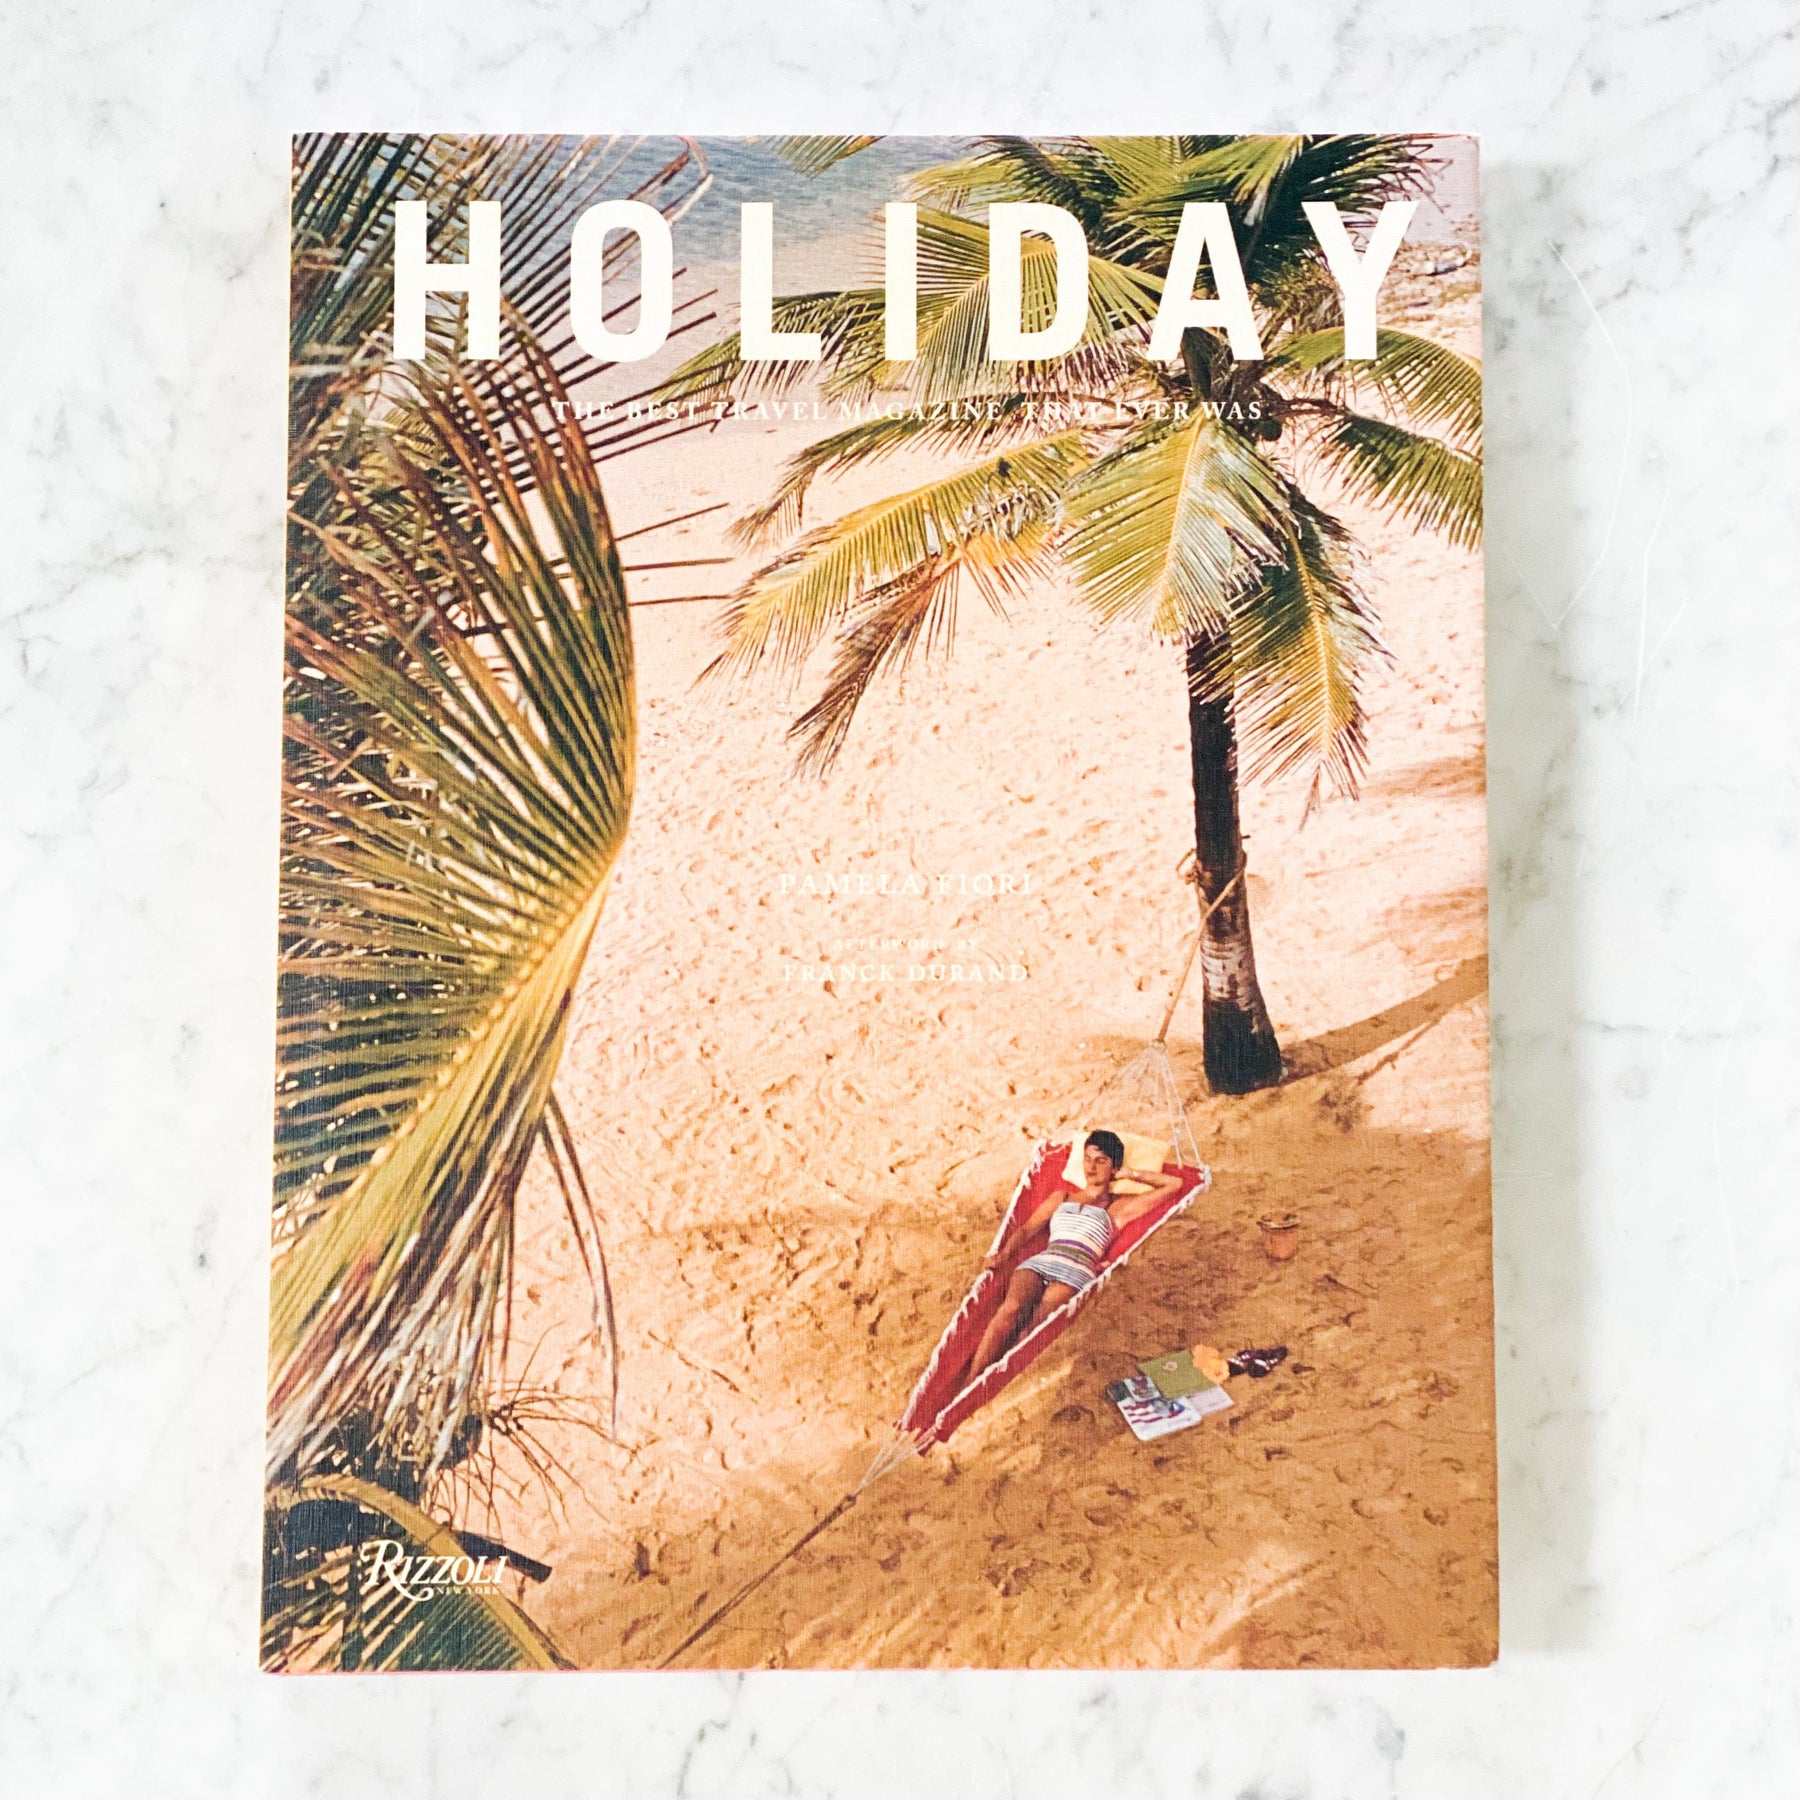 HOLIDAY The Best Travel Magazine that Ever Was Slim Aarons Henri